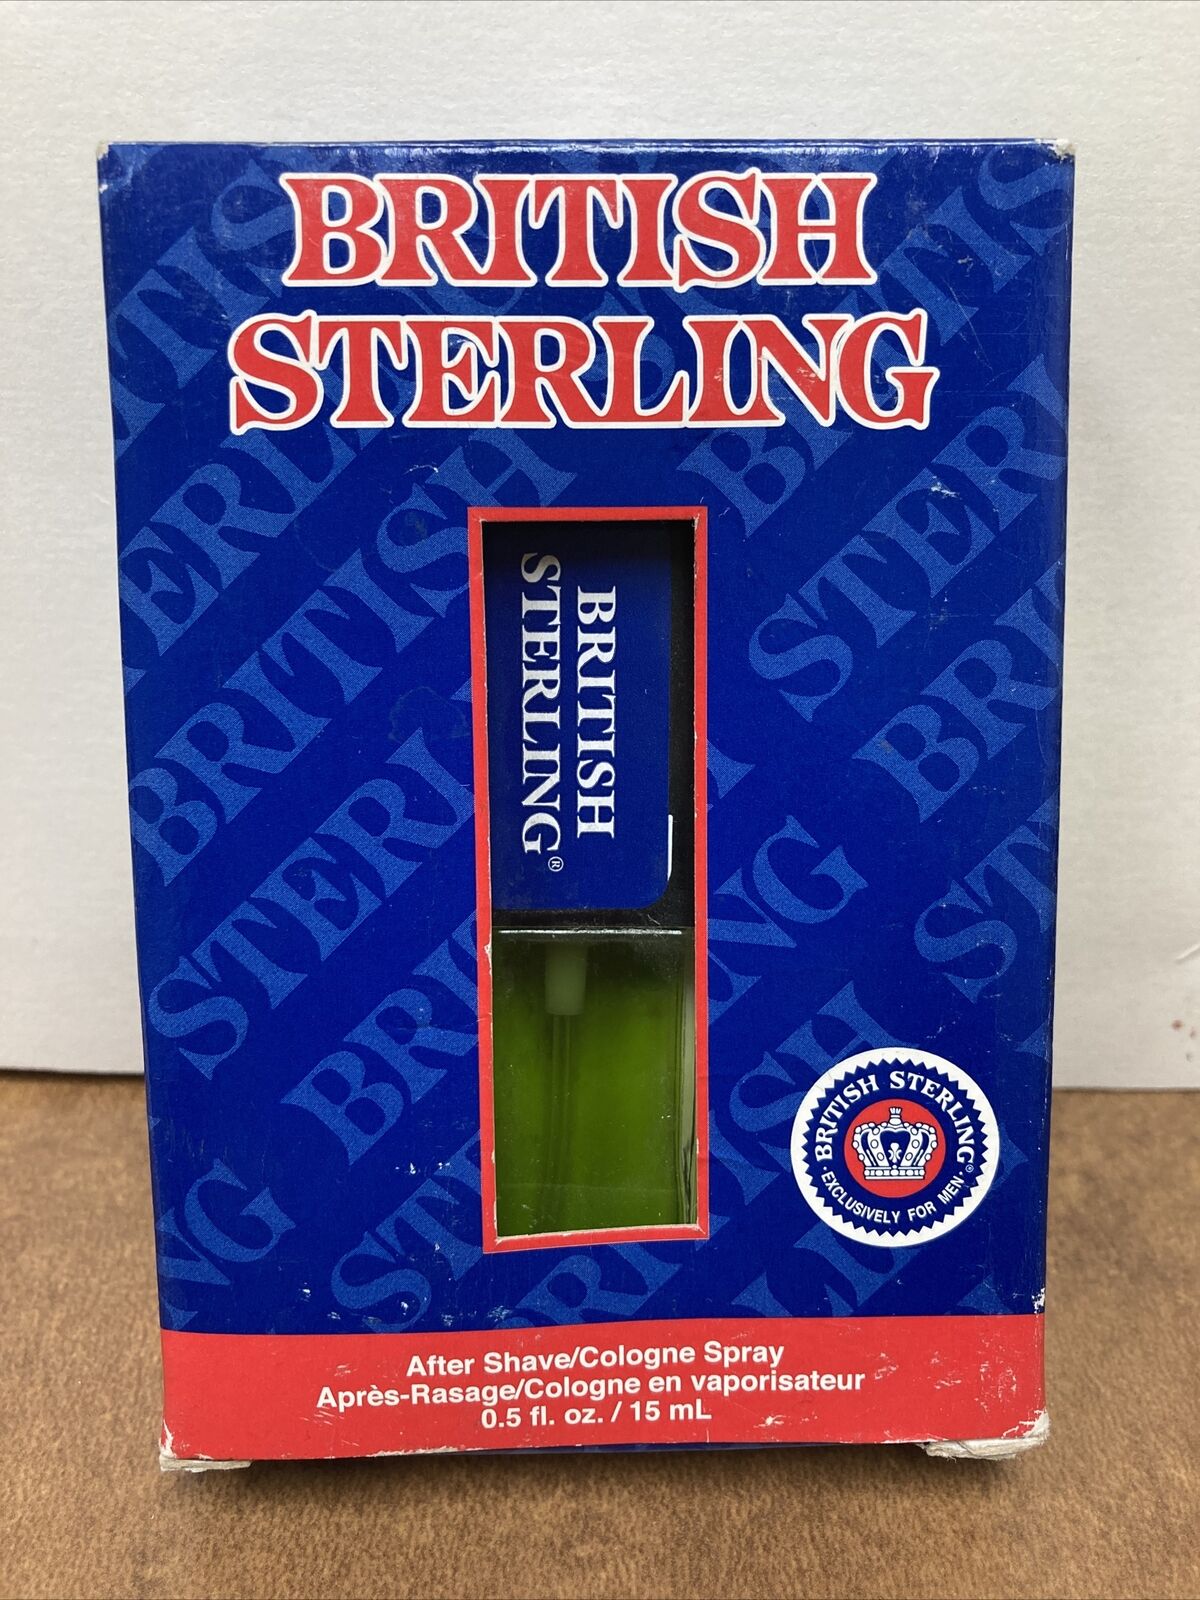 British Sterling by DANA After Shave 0.5oz Spray**RARE** VINTAGE*COLLECTIBLE*